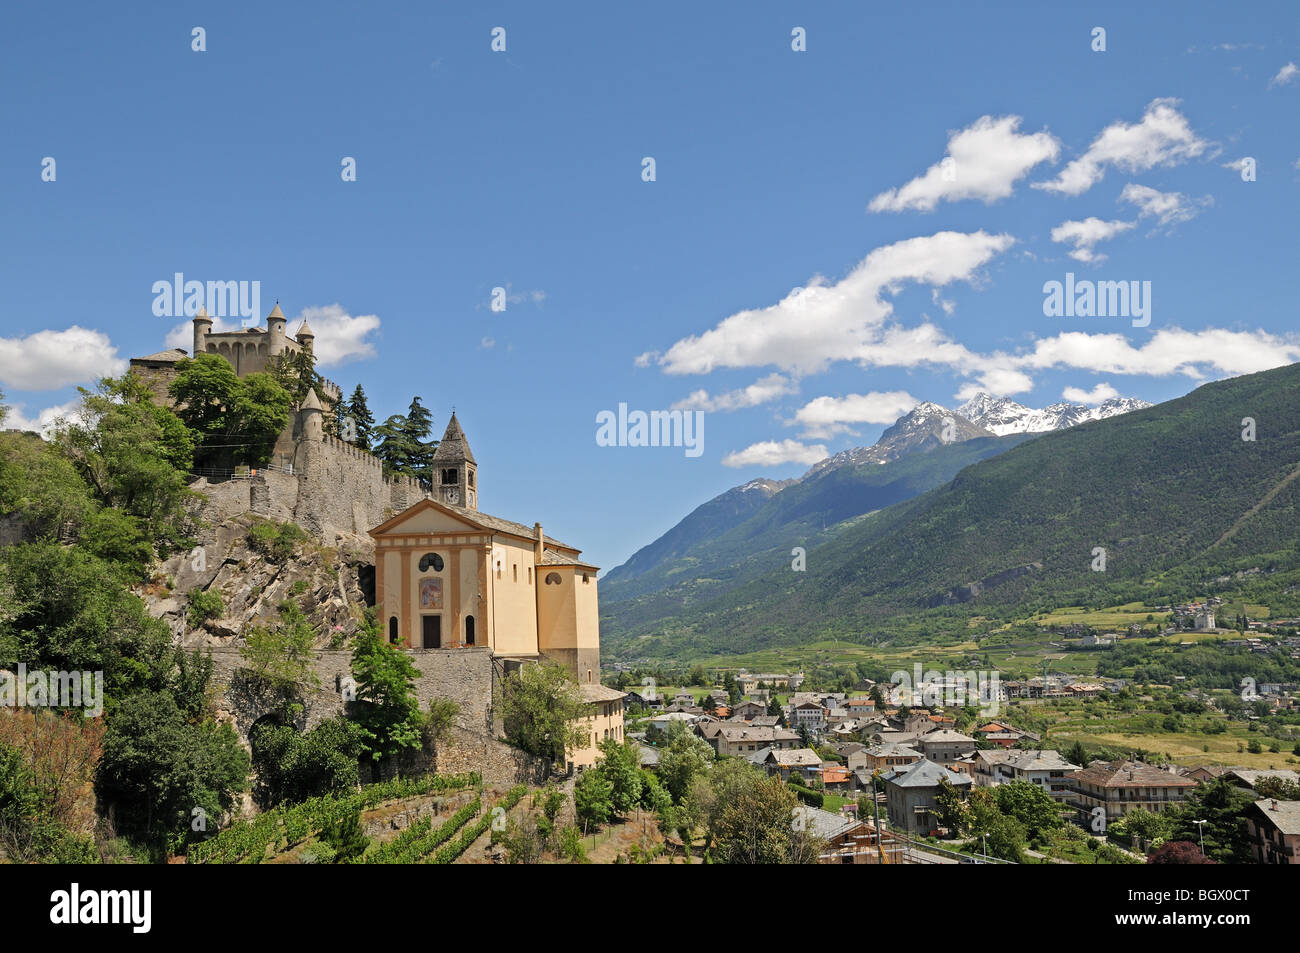 Saint St Pierre Castle Castello Parish Church and square bell tower 4 km west of Aosta Italy with alpine mountains in background Stock Photo